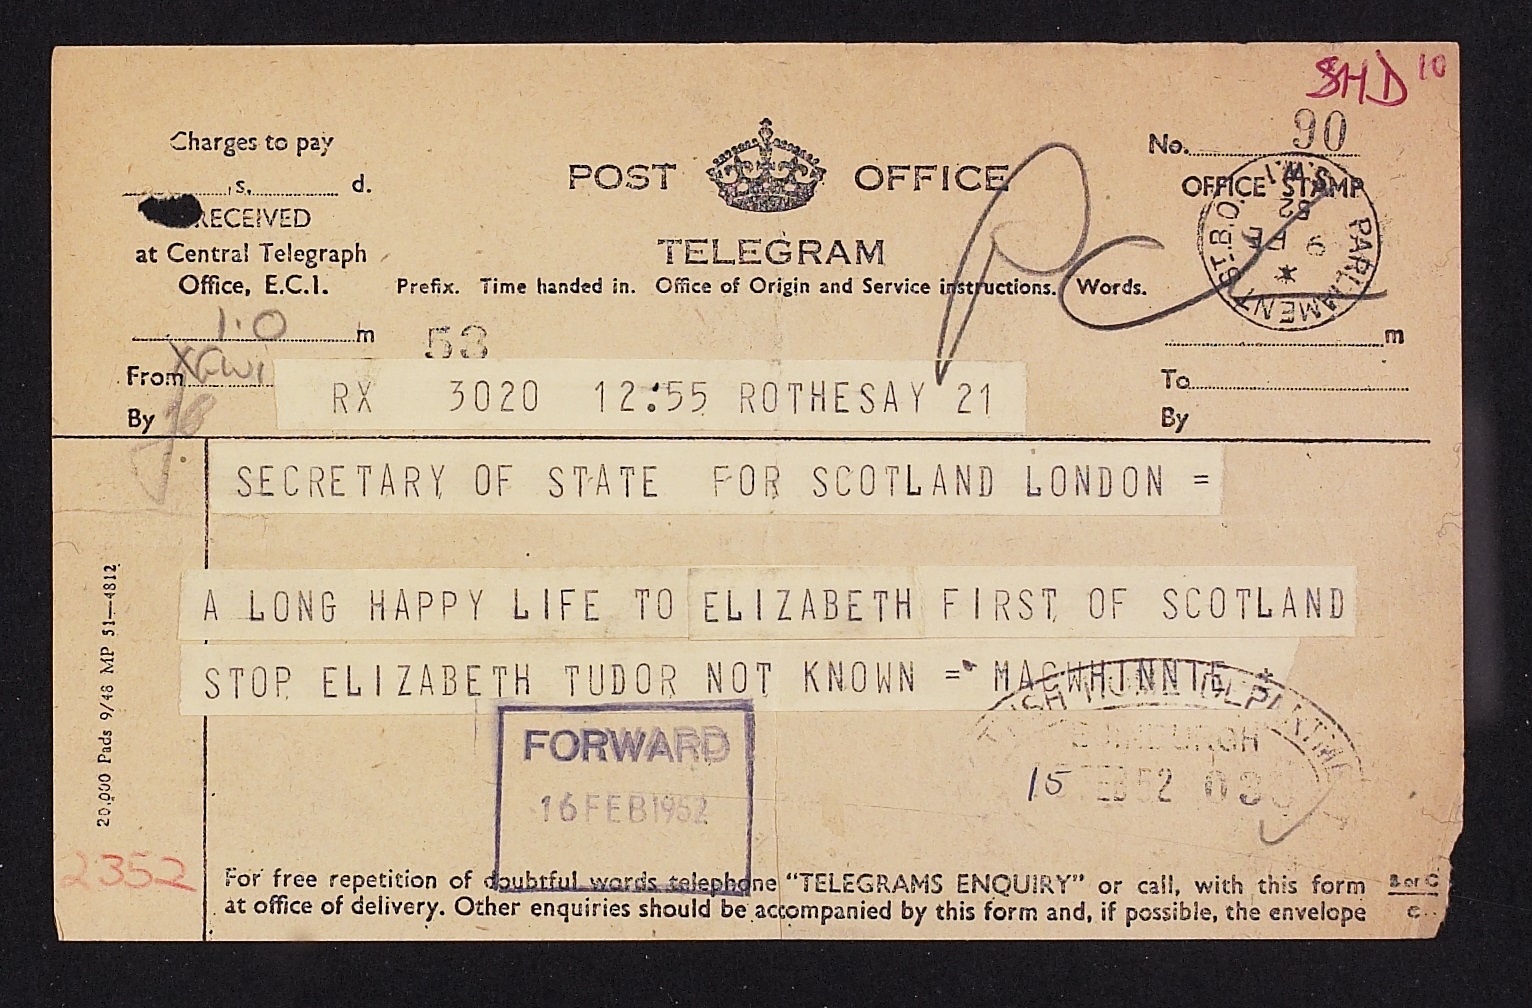 Photo of a telegram sent to the Secretary of State for Scotland pointed out that the Queen was the first Queen Elizabeth to reign in Scotland, 1952